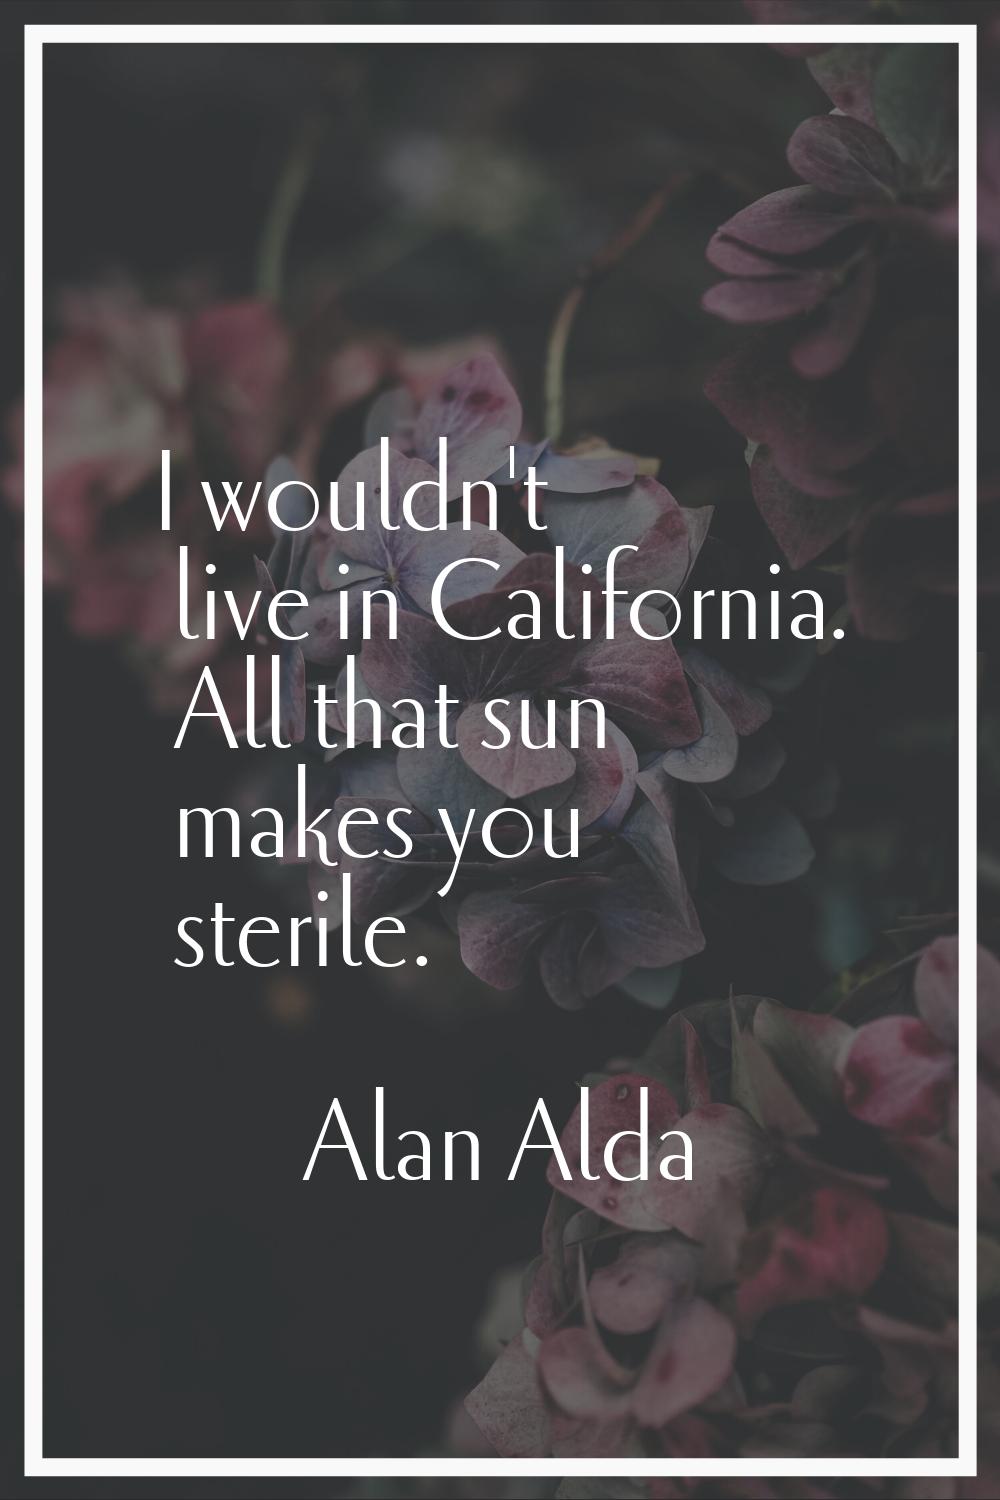 I wouldn't live in California. All that sun makes you sterile.